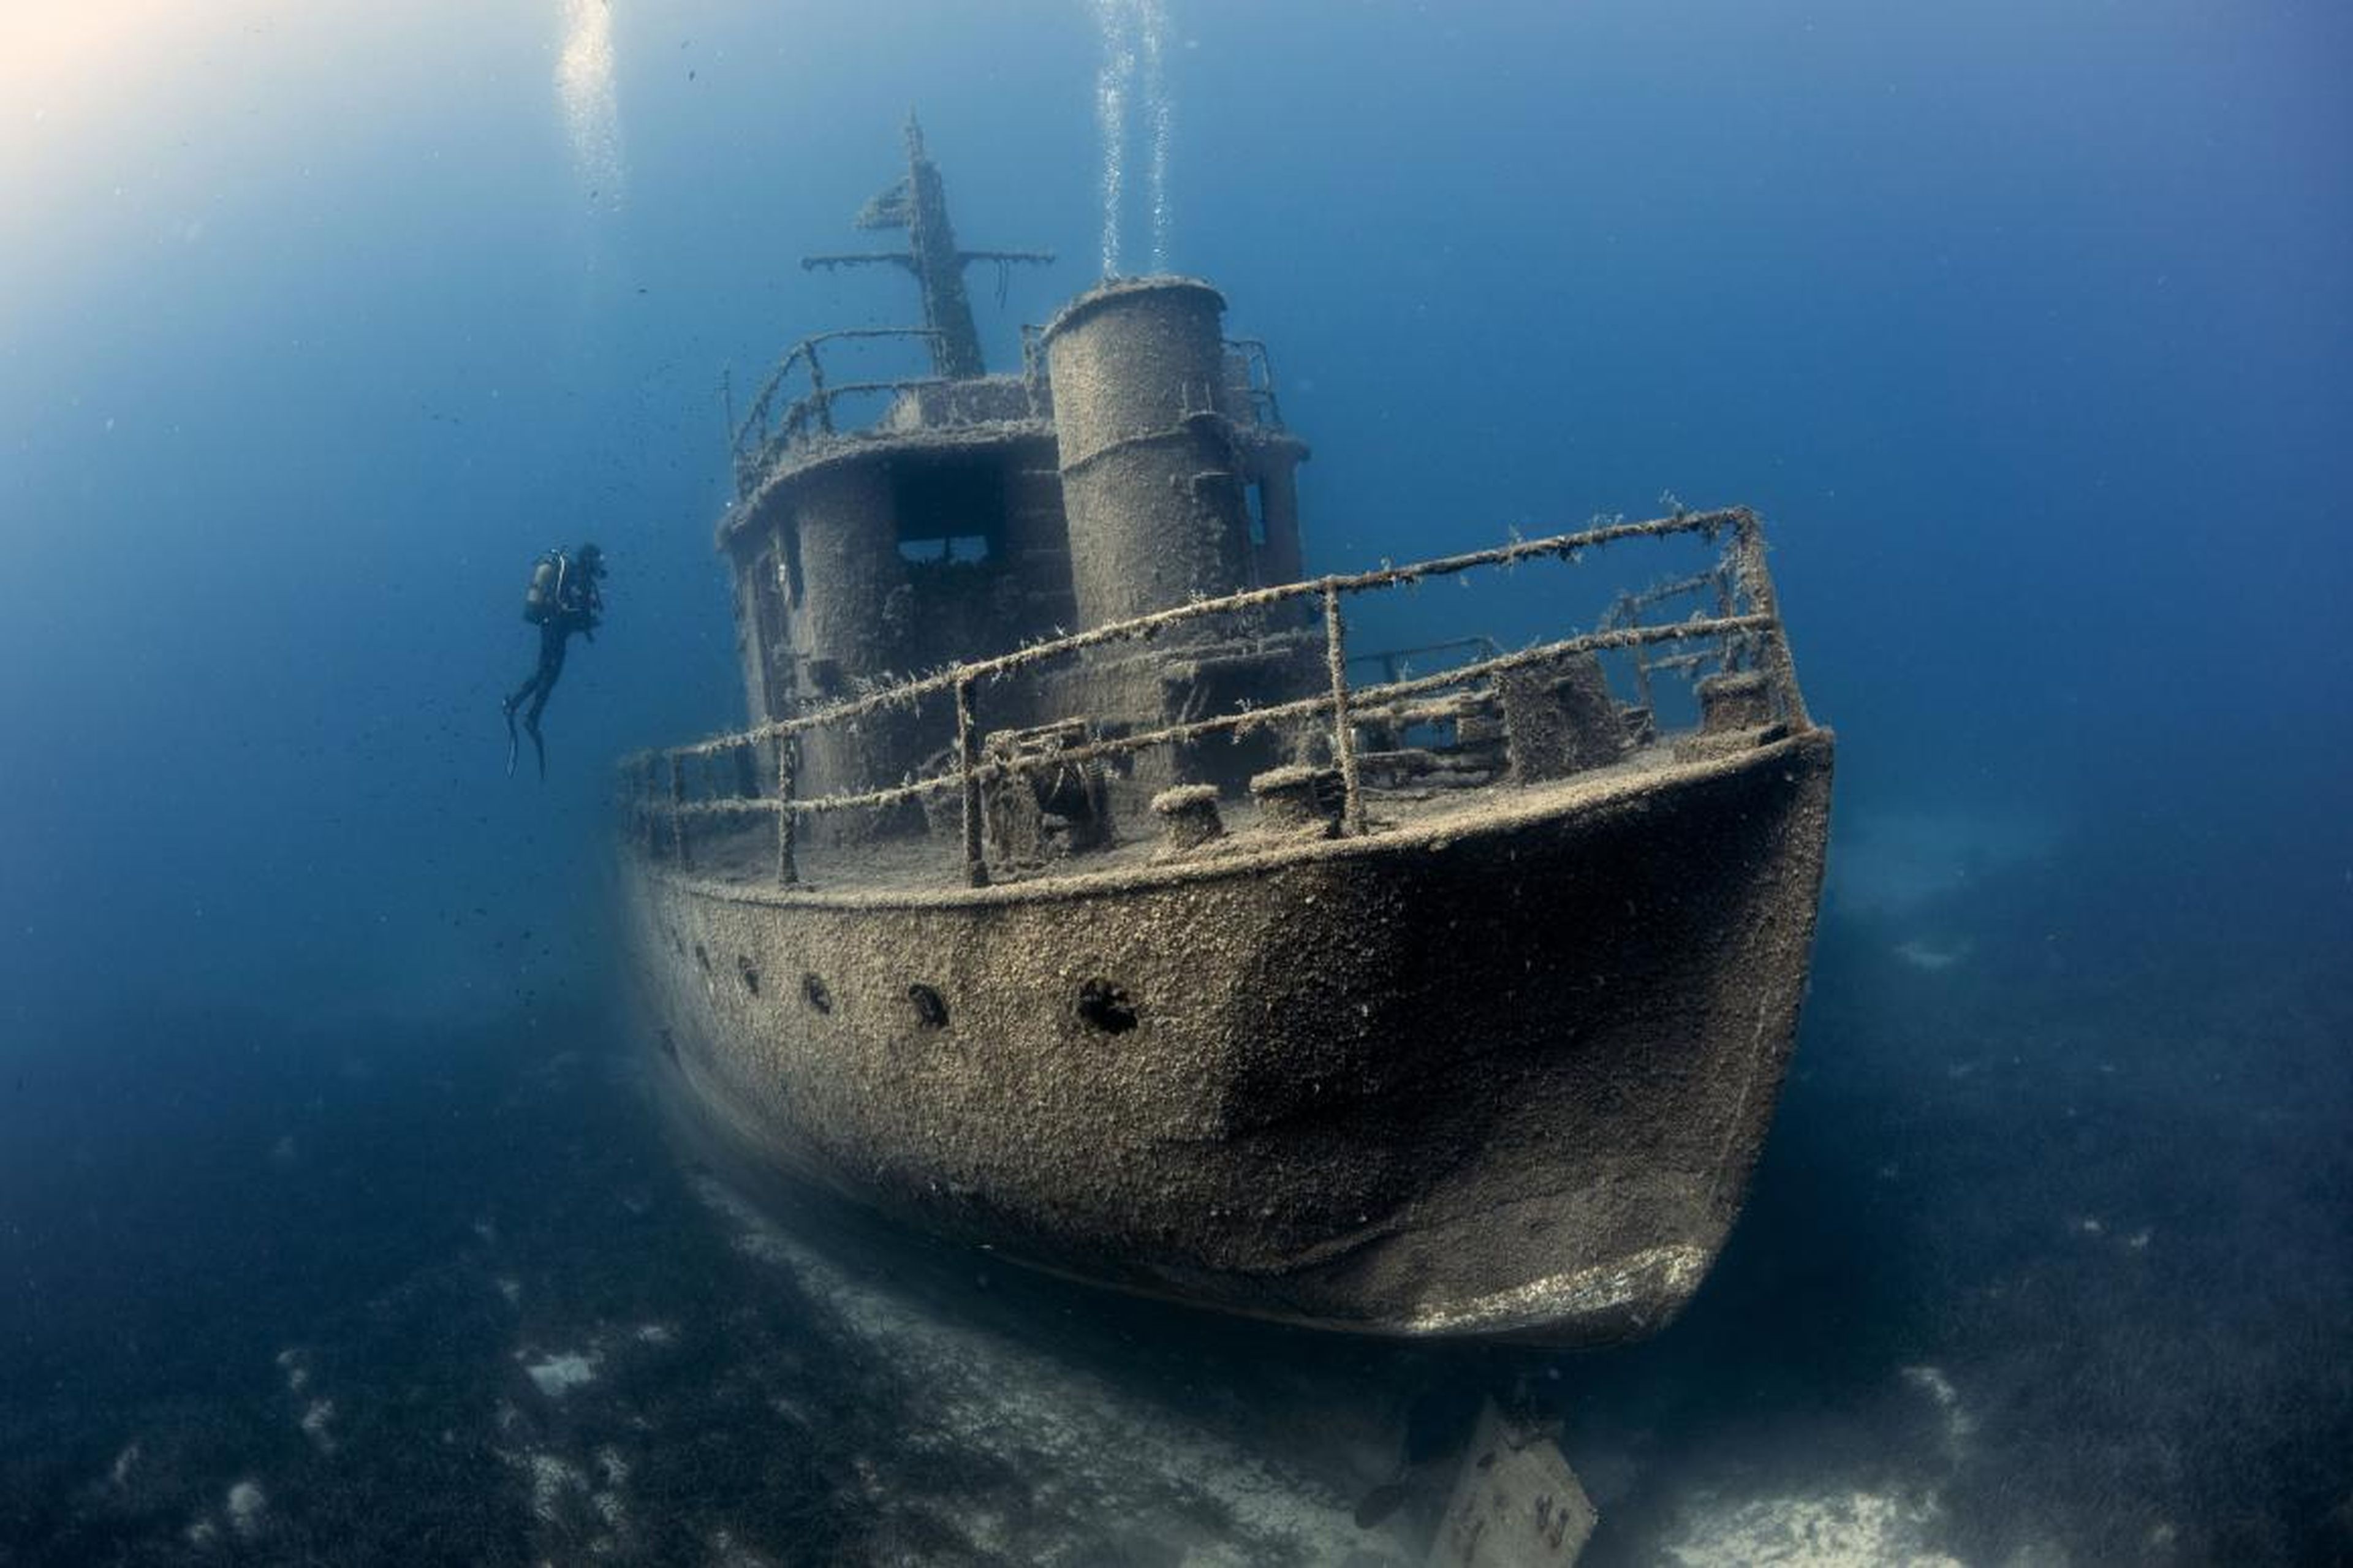 The contest isn't just about animals. Mehmet Öztabak won the "Wrecks" category with this photo of a diver exploring the Pinar 1 shipwreck in Bodrum, Turkey.